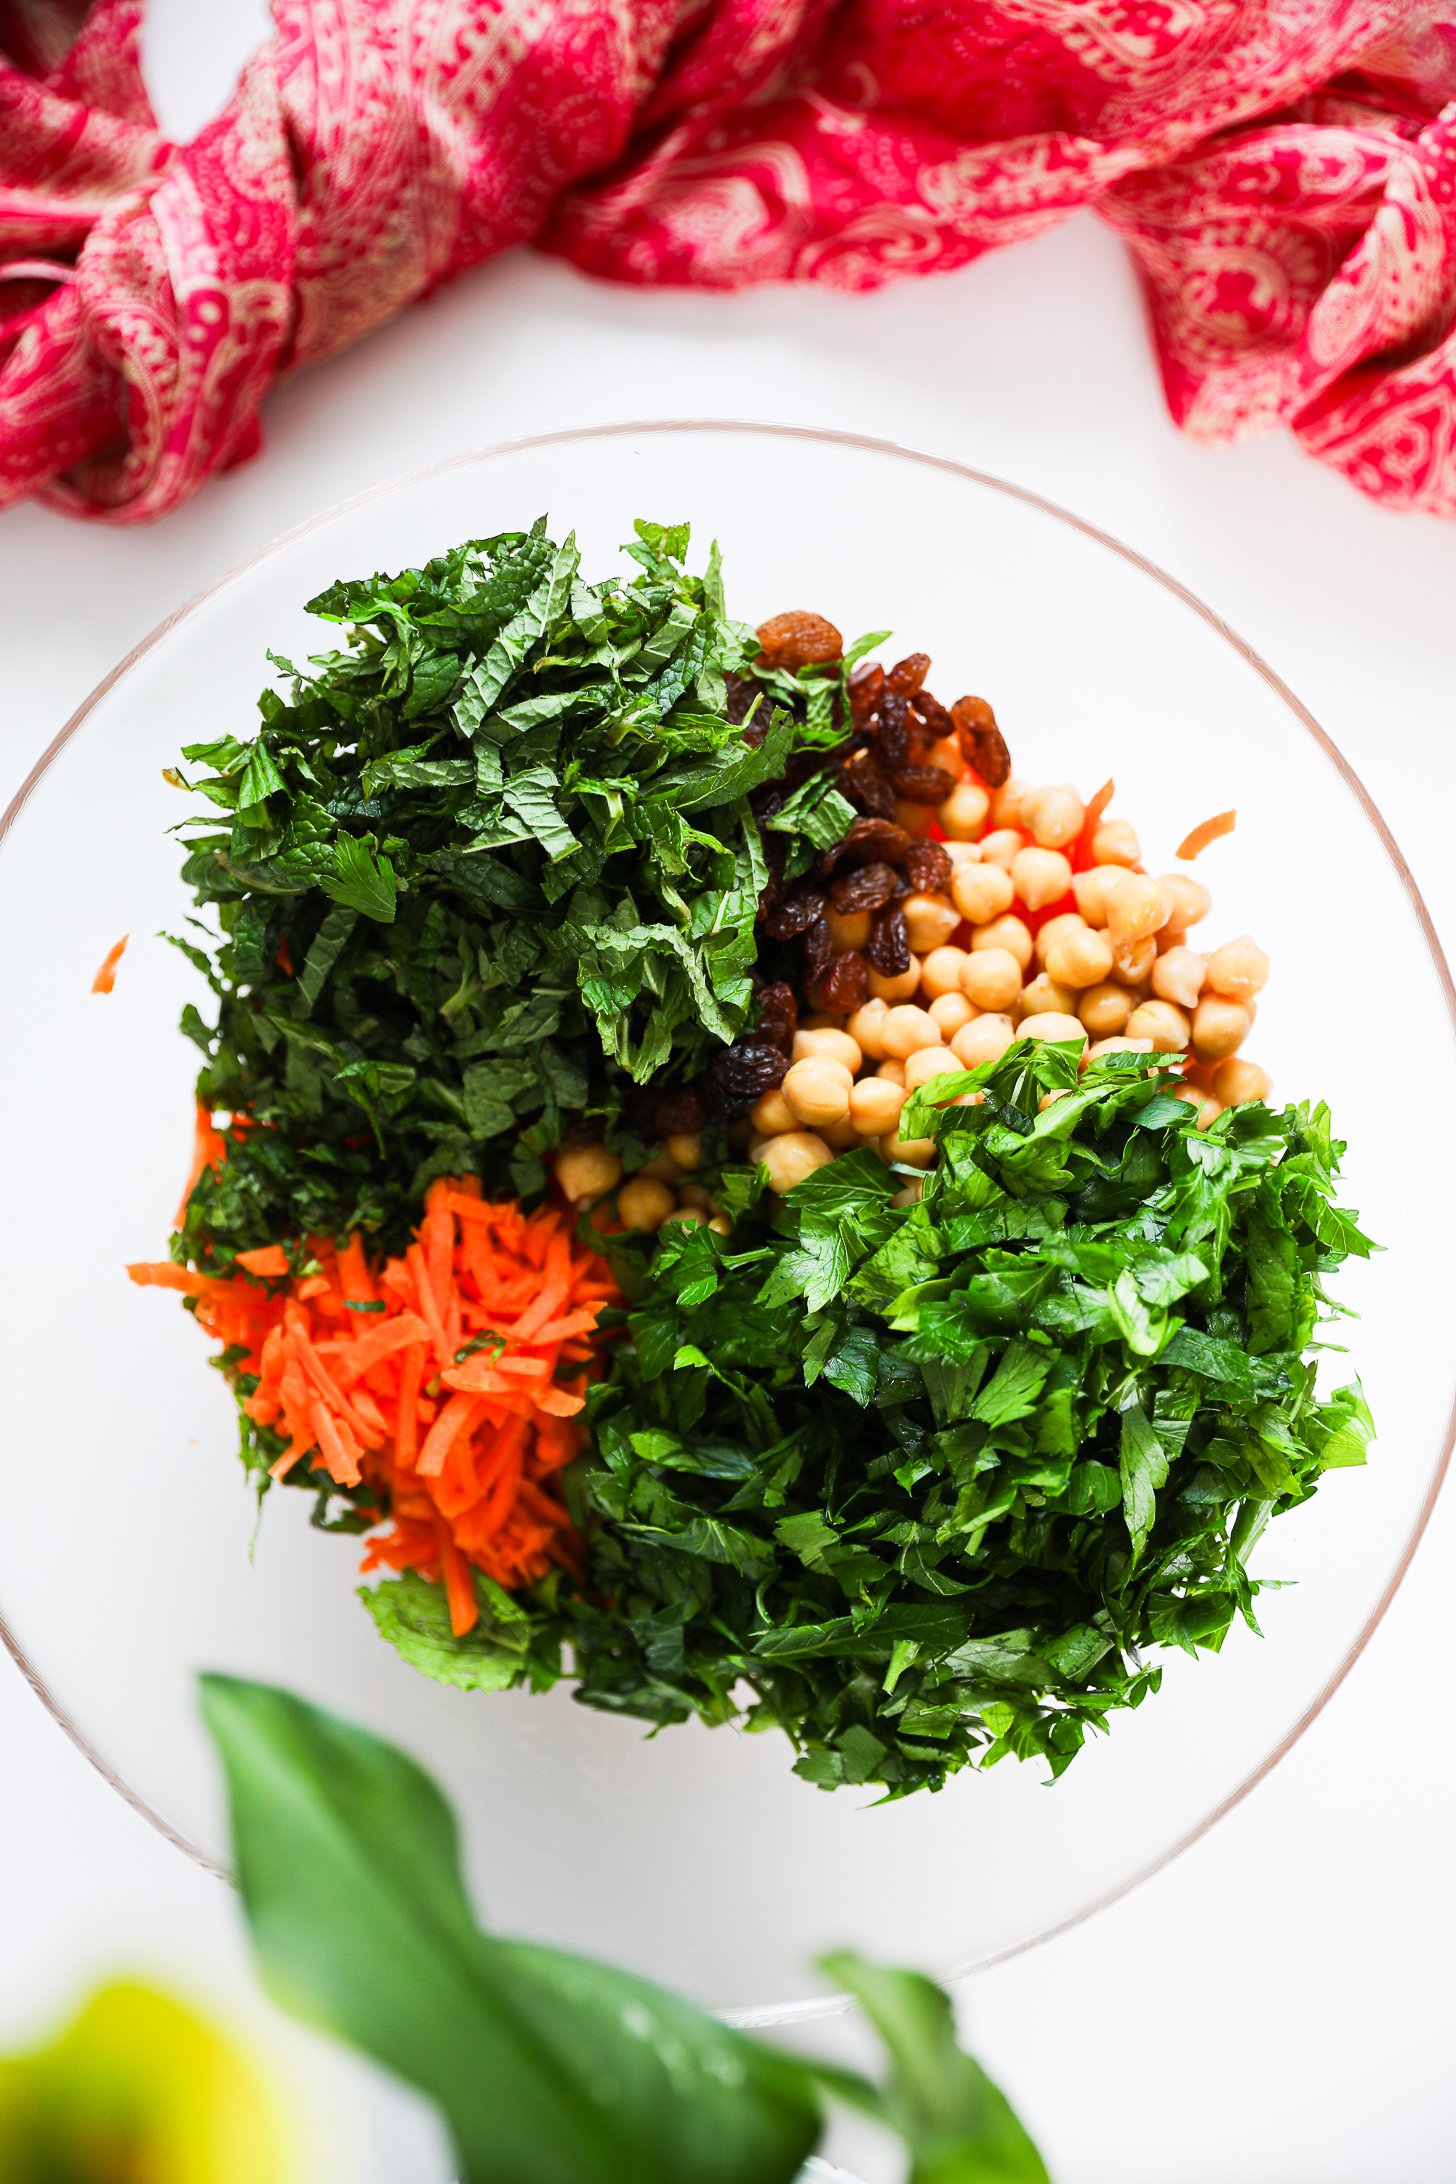 Overhead view of a salad bowl with grated carrots, chickpeas, raisins and herbs side by side.